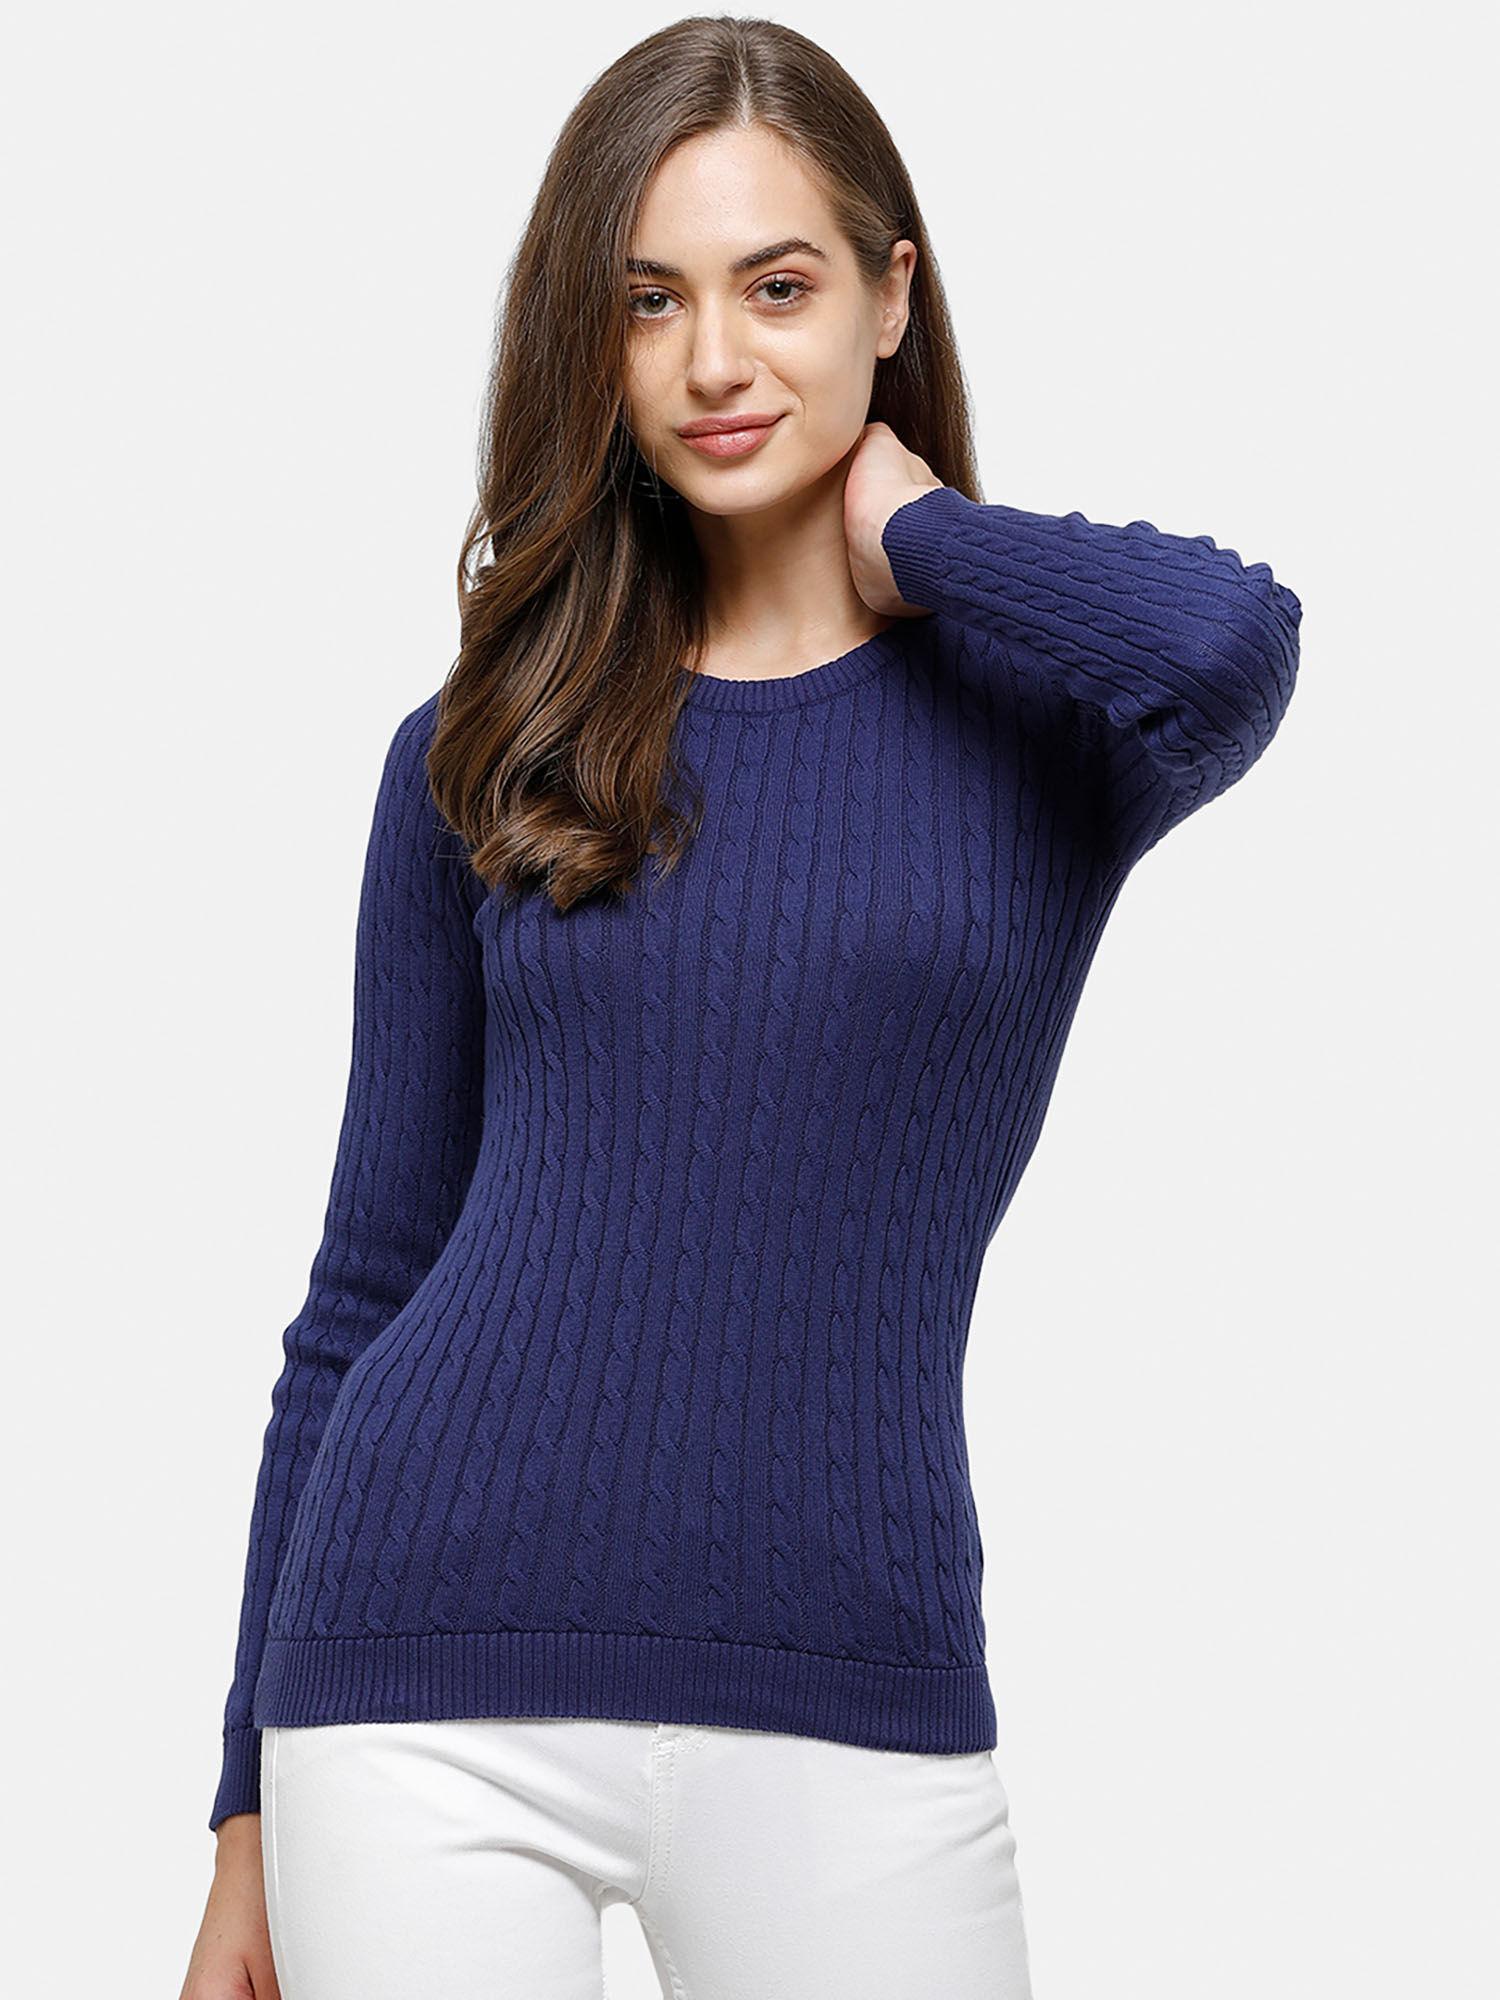 98 degree north's blue full sleeves sweater